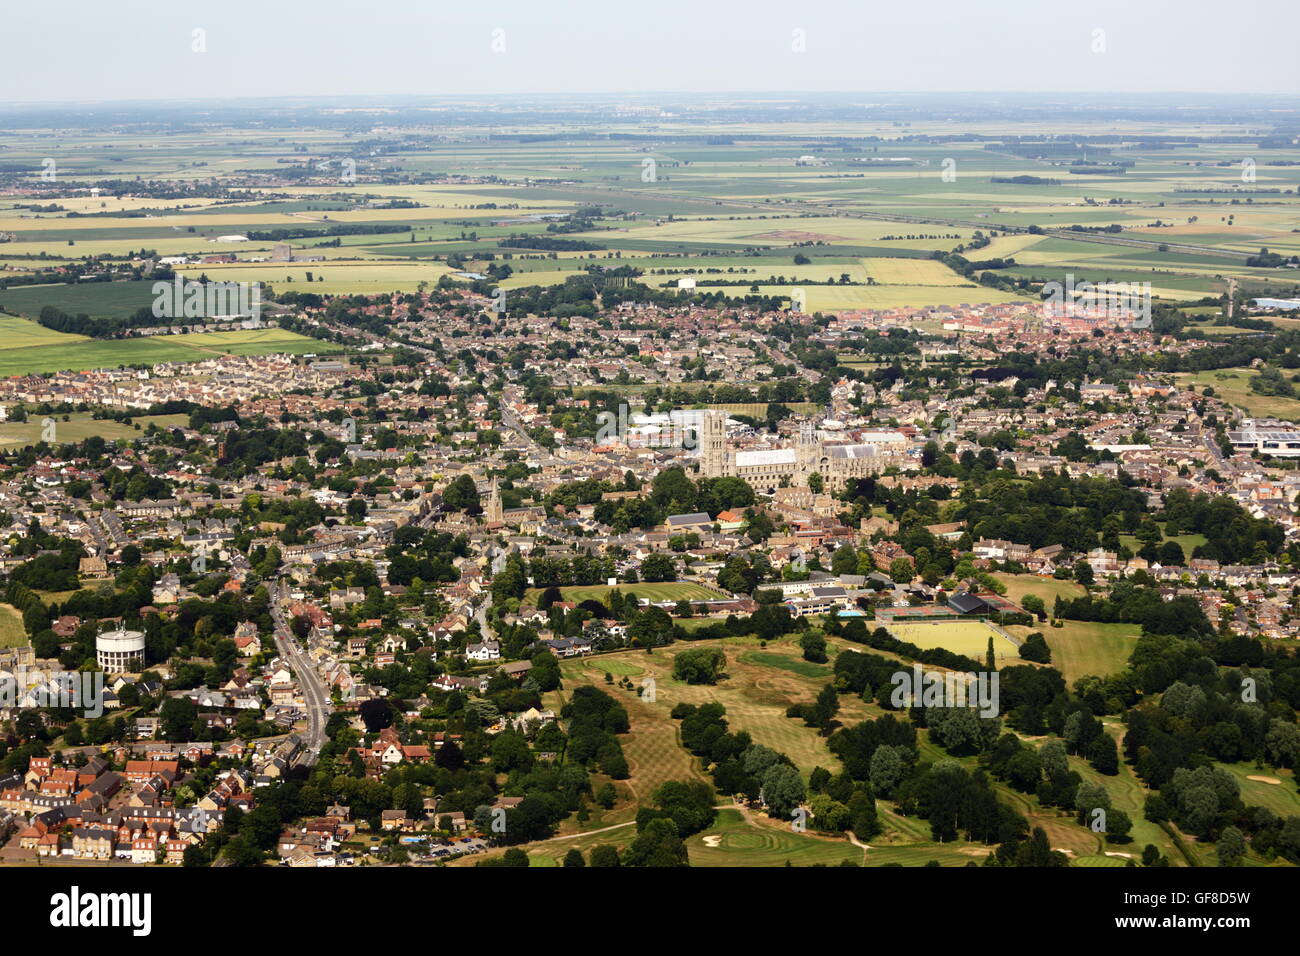 Ely Aerial View Banque D'Images